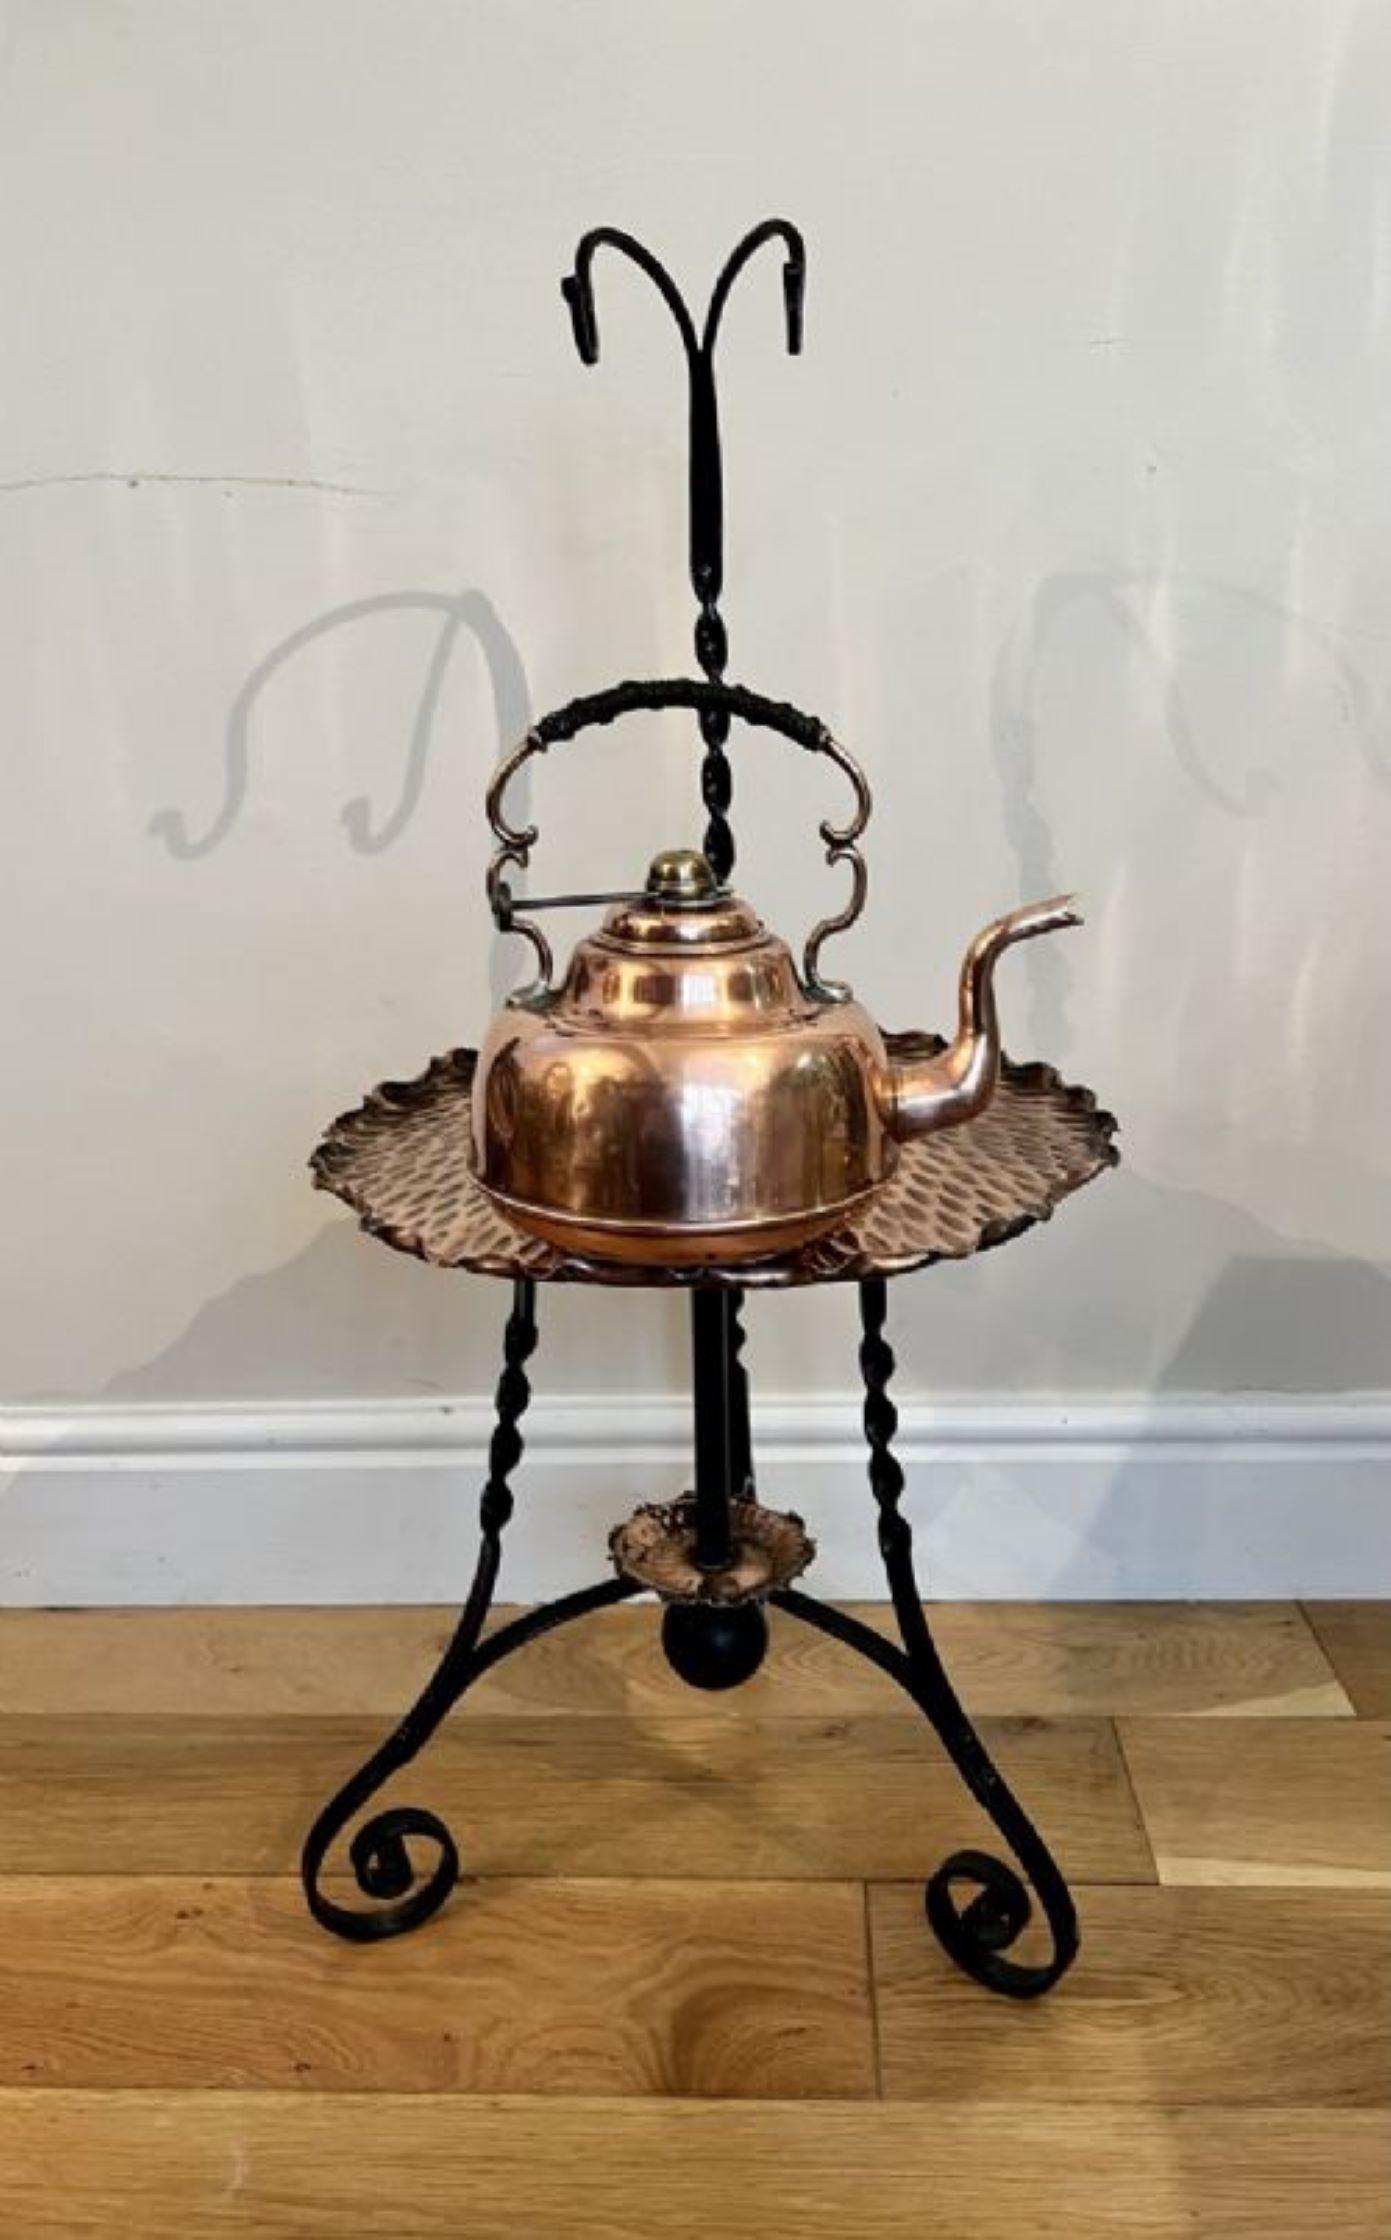 Unusual antique art and crafts quality copper hanging kettle having a quality hanging copper kettle above a shaped copper tray, supported by an iron stand with shaped feet.